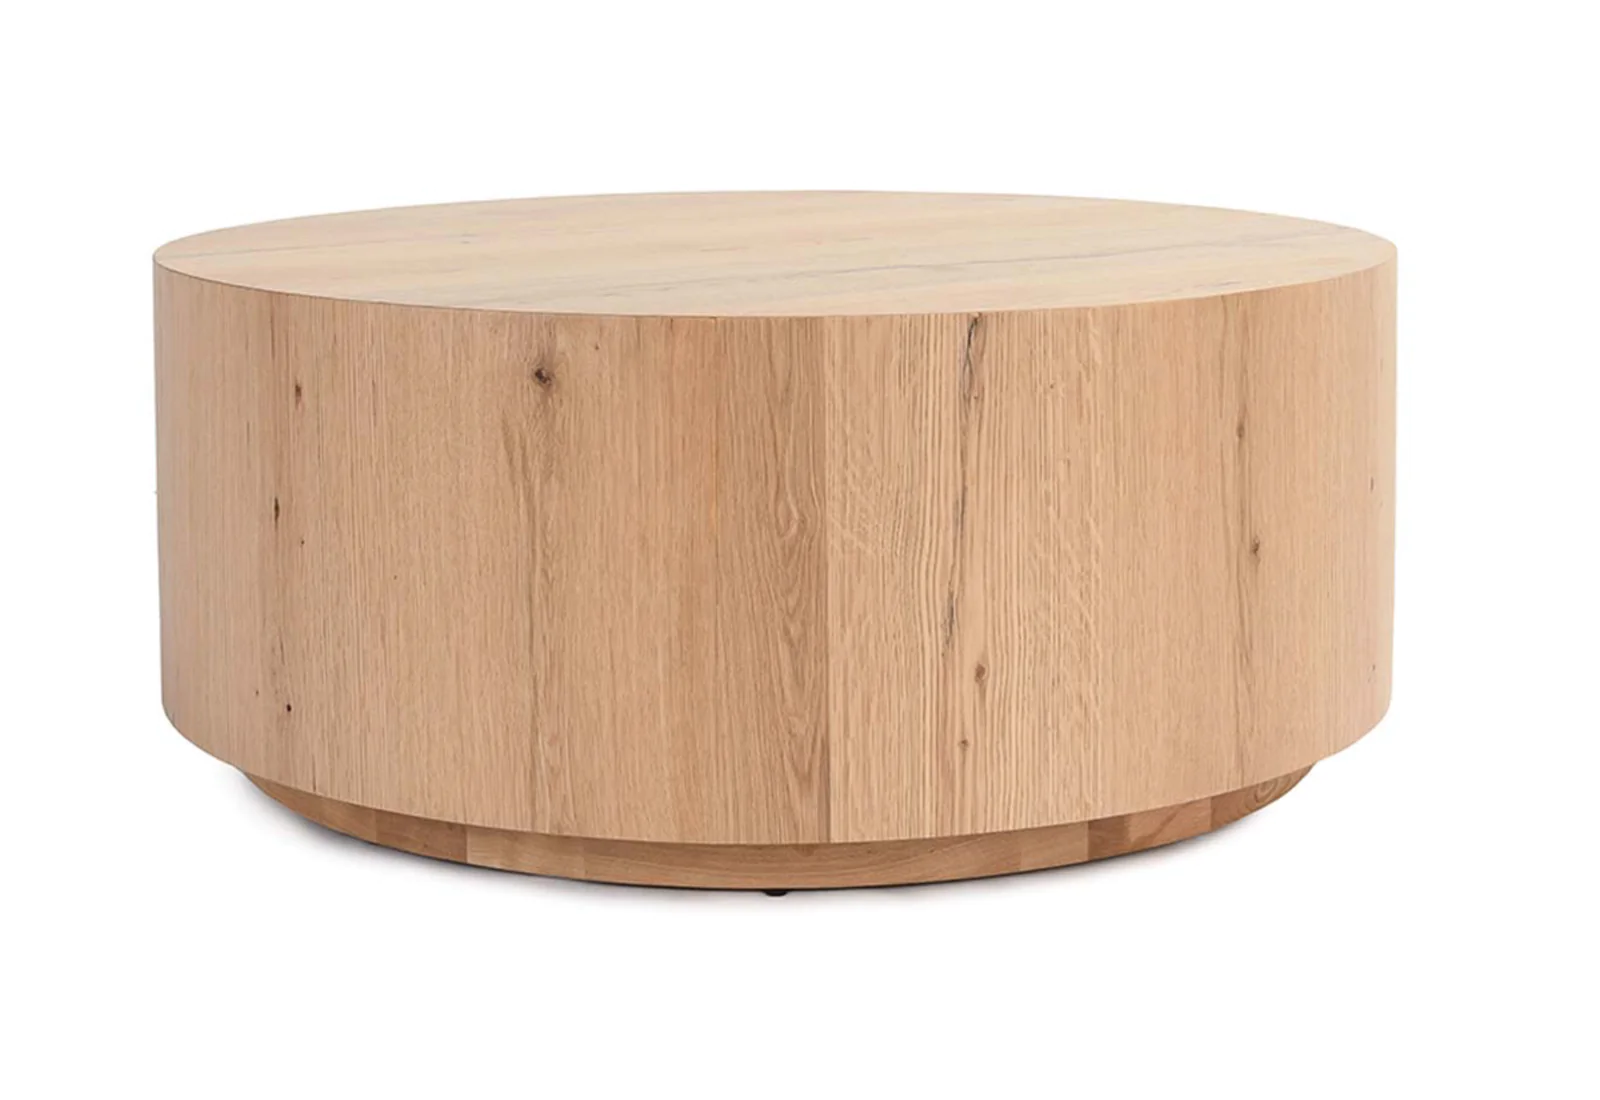 Light Natural Coffee Tables